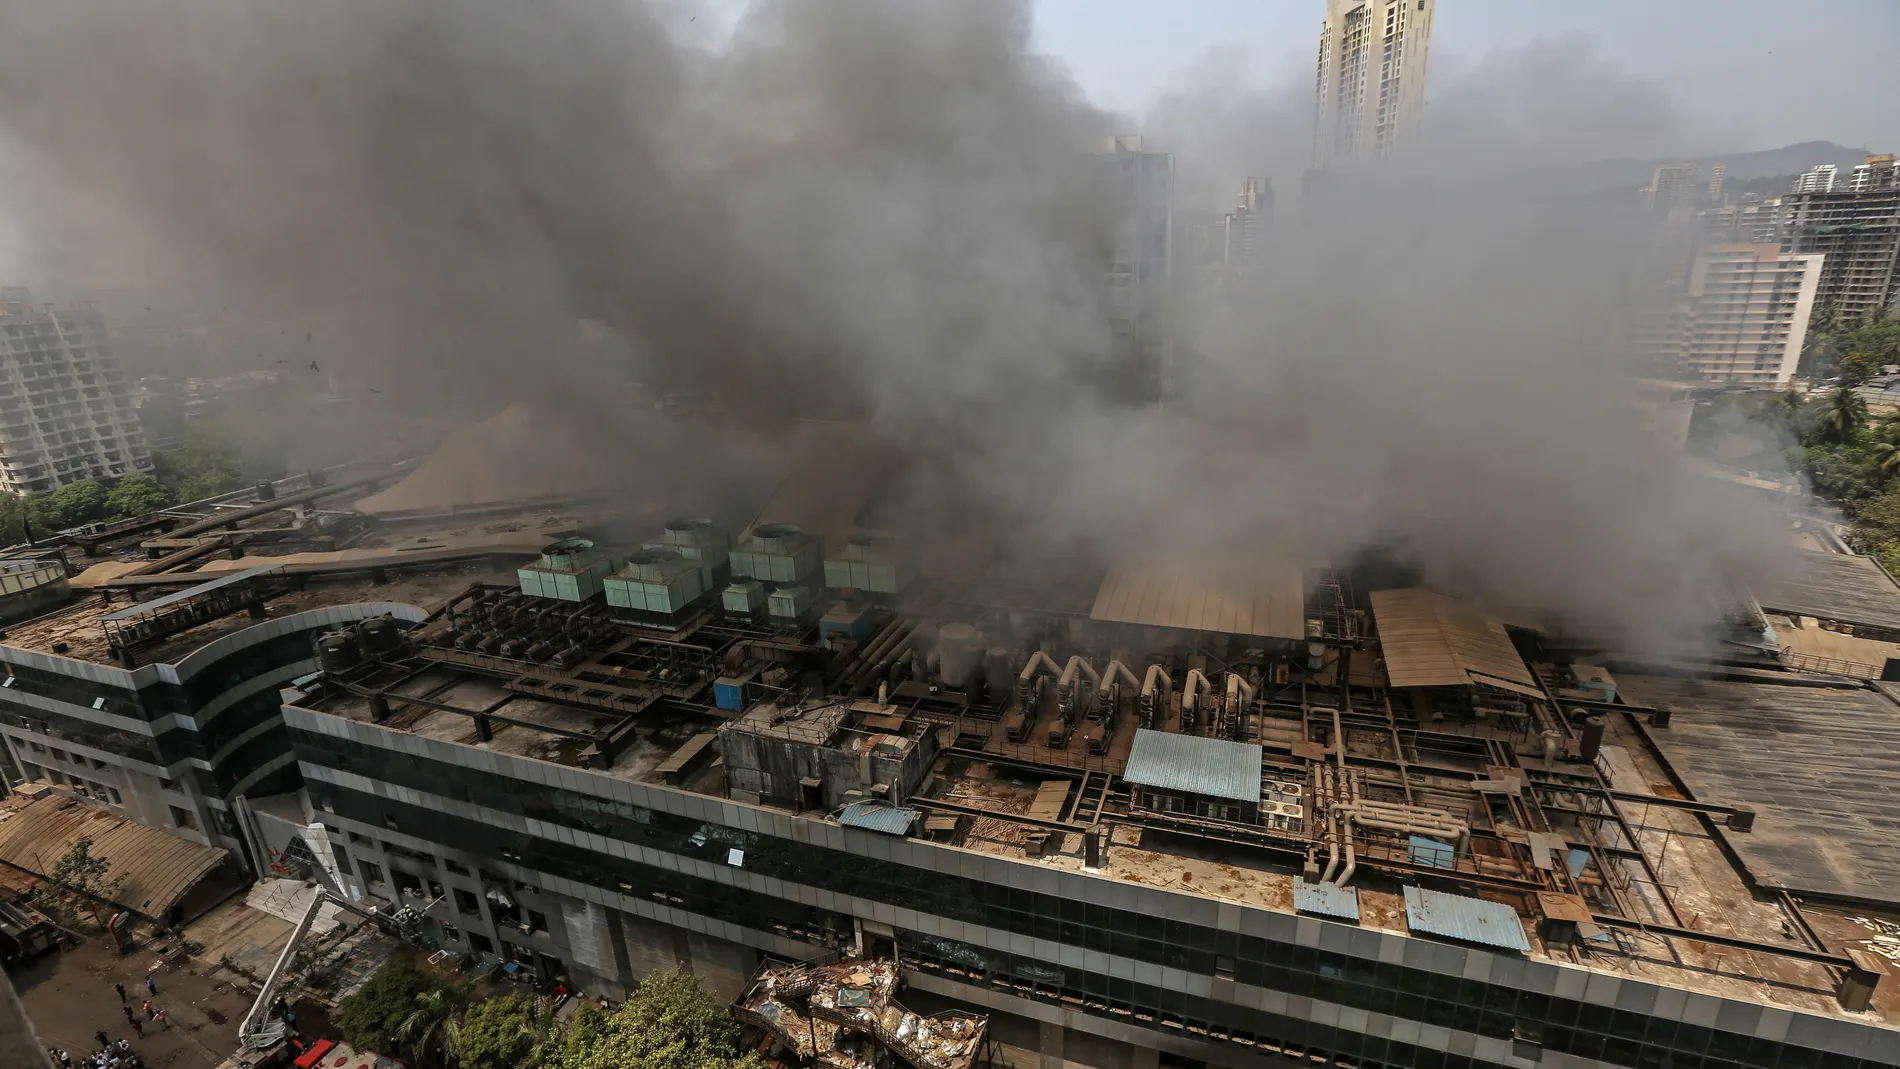 Mumbai (India), 26/03/2021.- Smoke rises from a fire that broke out at a Covid-19 hospital inside a mall in Mumbai, India, 26 March 2021. At least 10 people were killed and several others were evacuated after a fire broke out overnight at the Dreams Mall Sunrise Hospital. (Incendio) EFE/EPA/DIVYAKANT SOLANKI